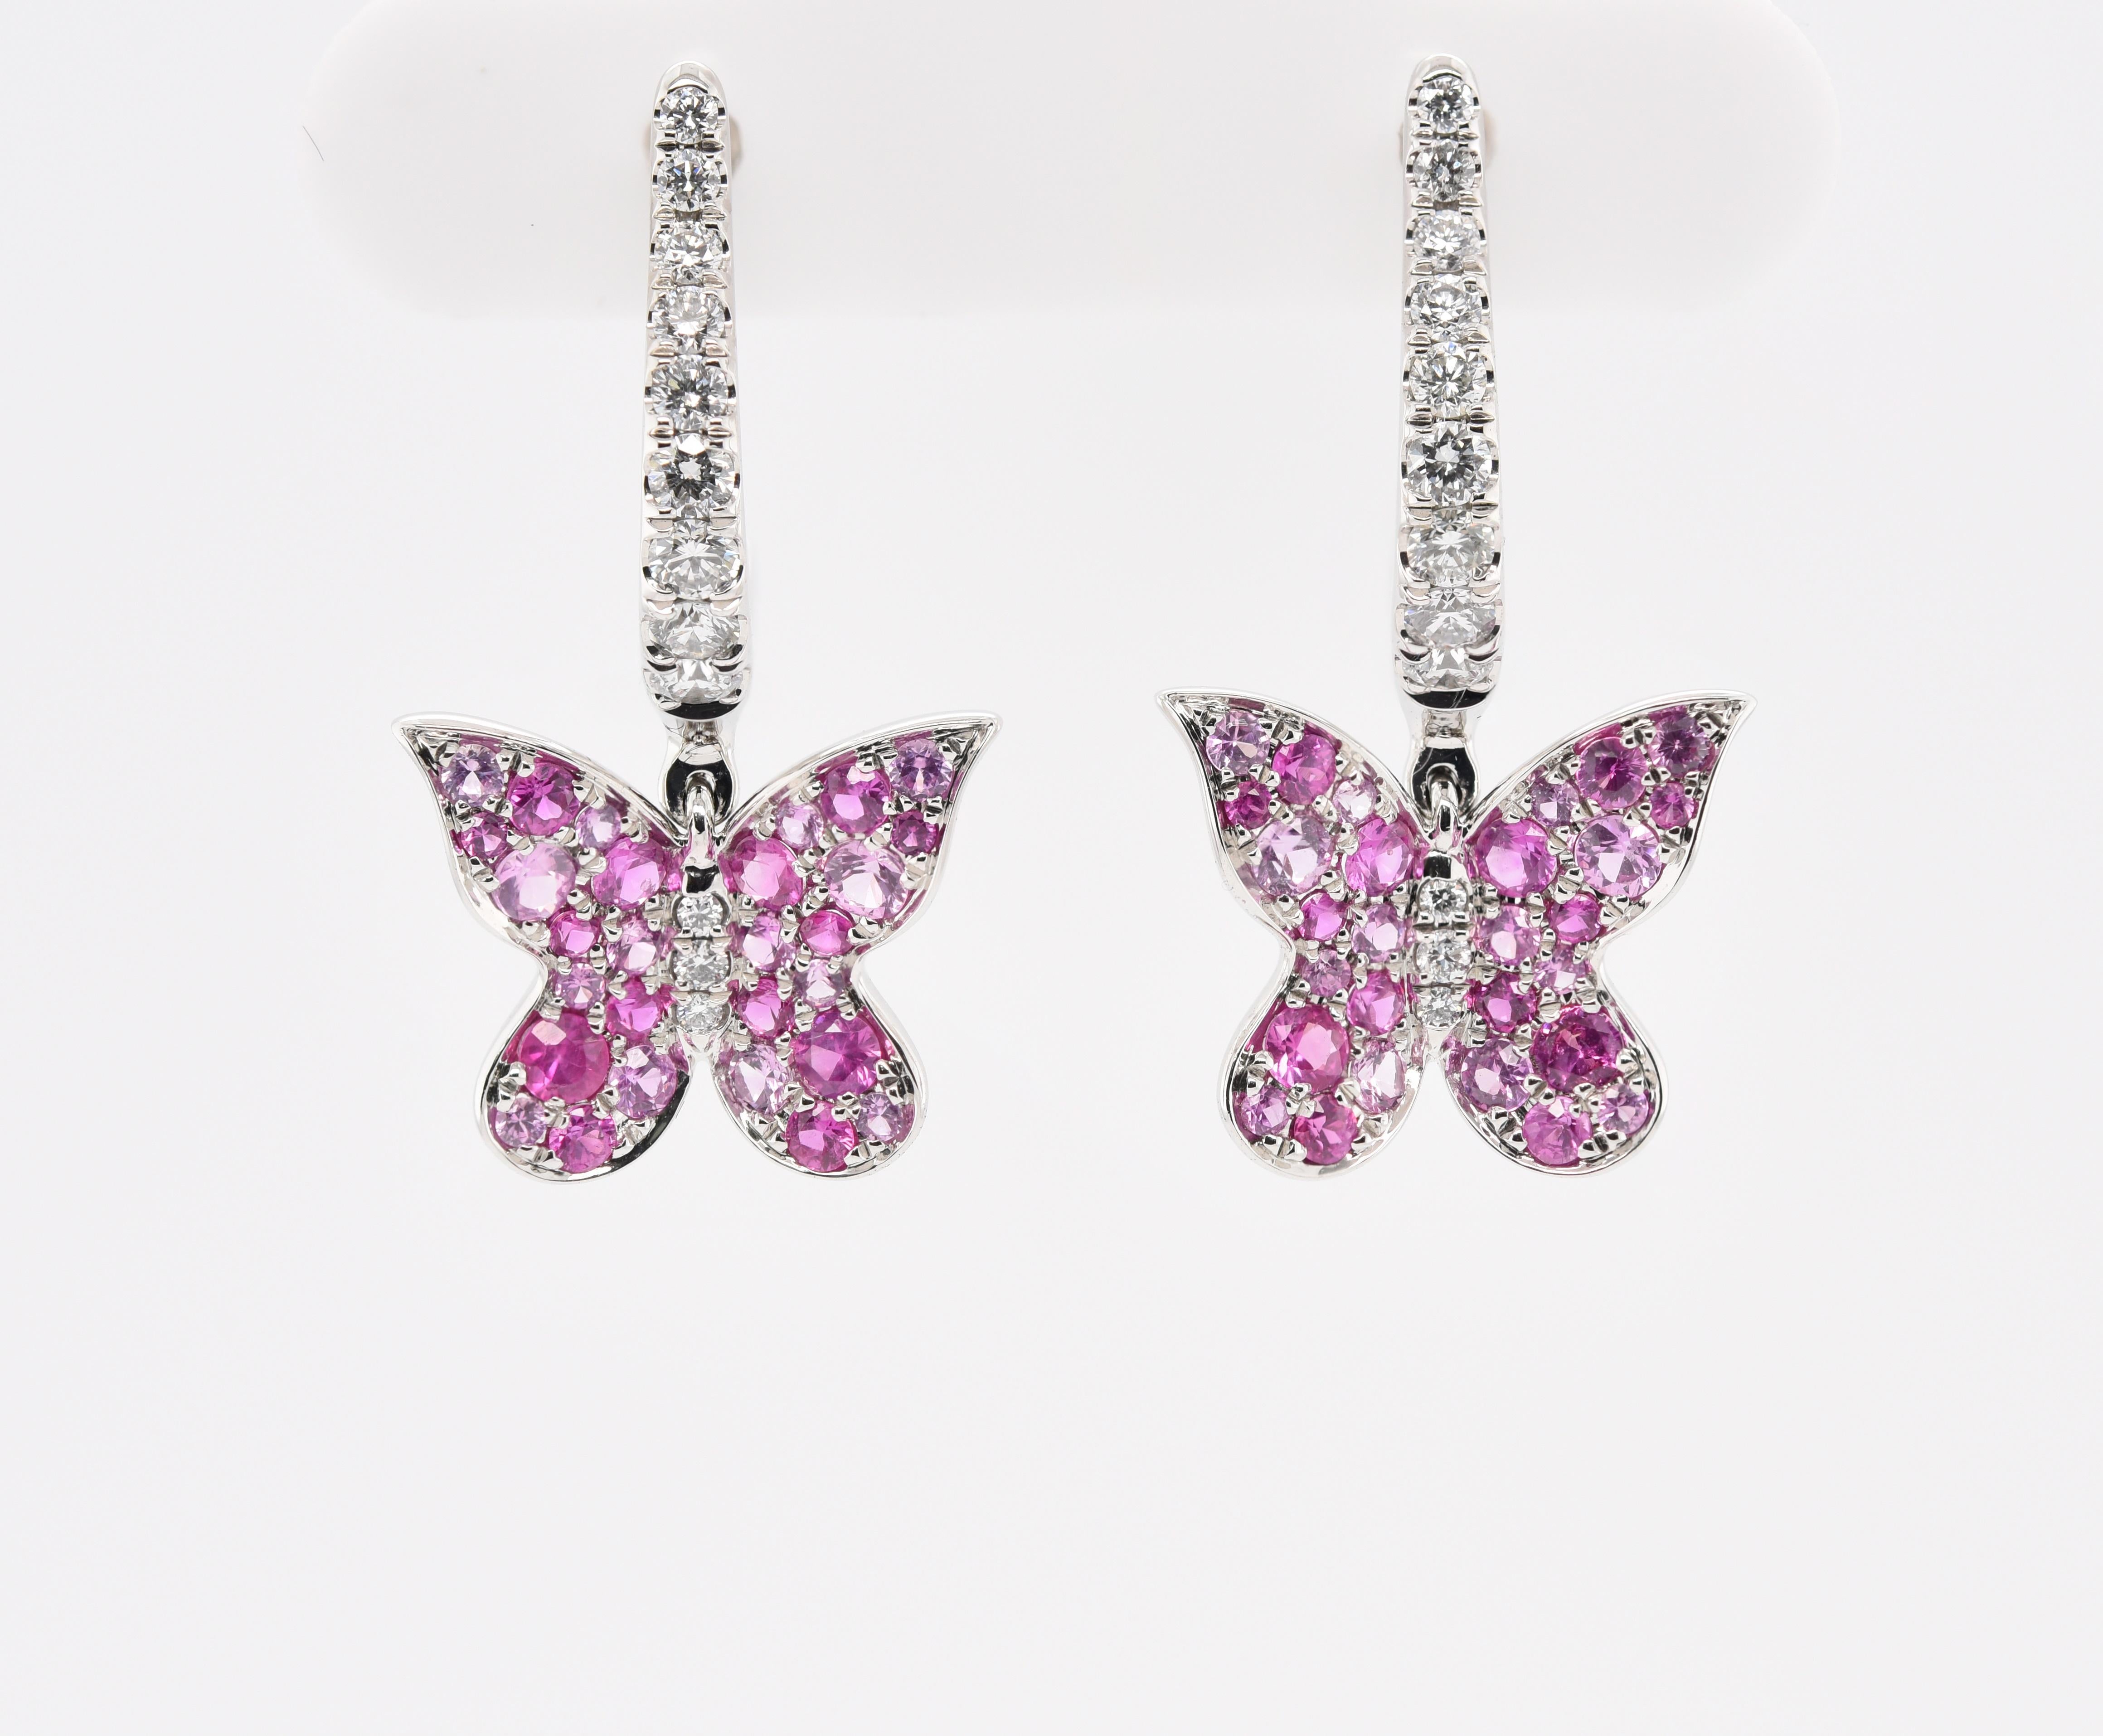 The hues of light and medium Pink Sapphires covered the wing of the butterfly while the thorax and the rest of the earring is comprised of diamonds. The Pink Sapphires have a total gem weight of over 1 carat and the diamonds are over 40 points for a